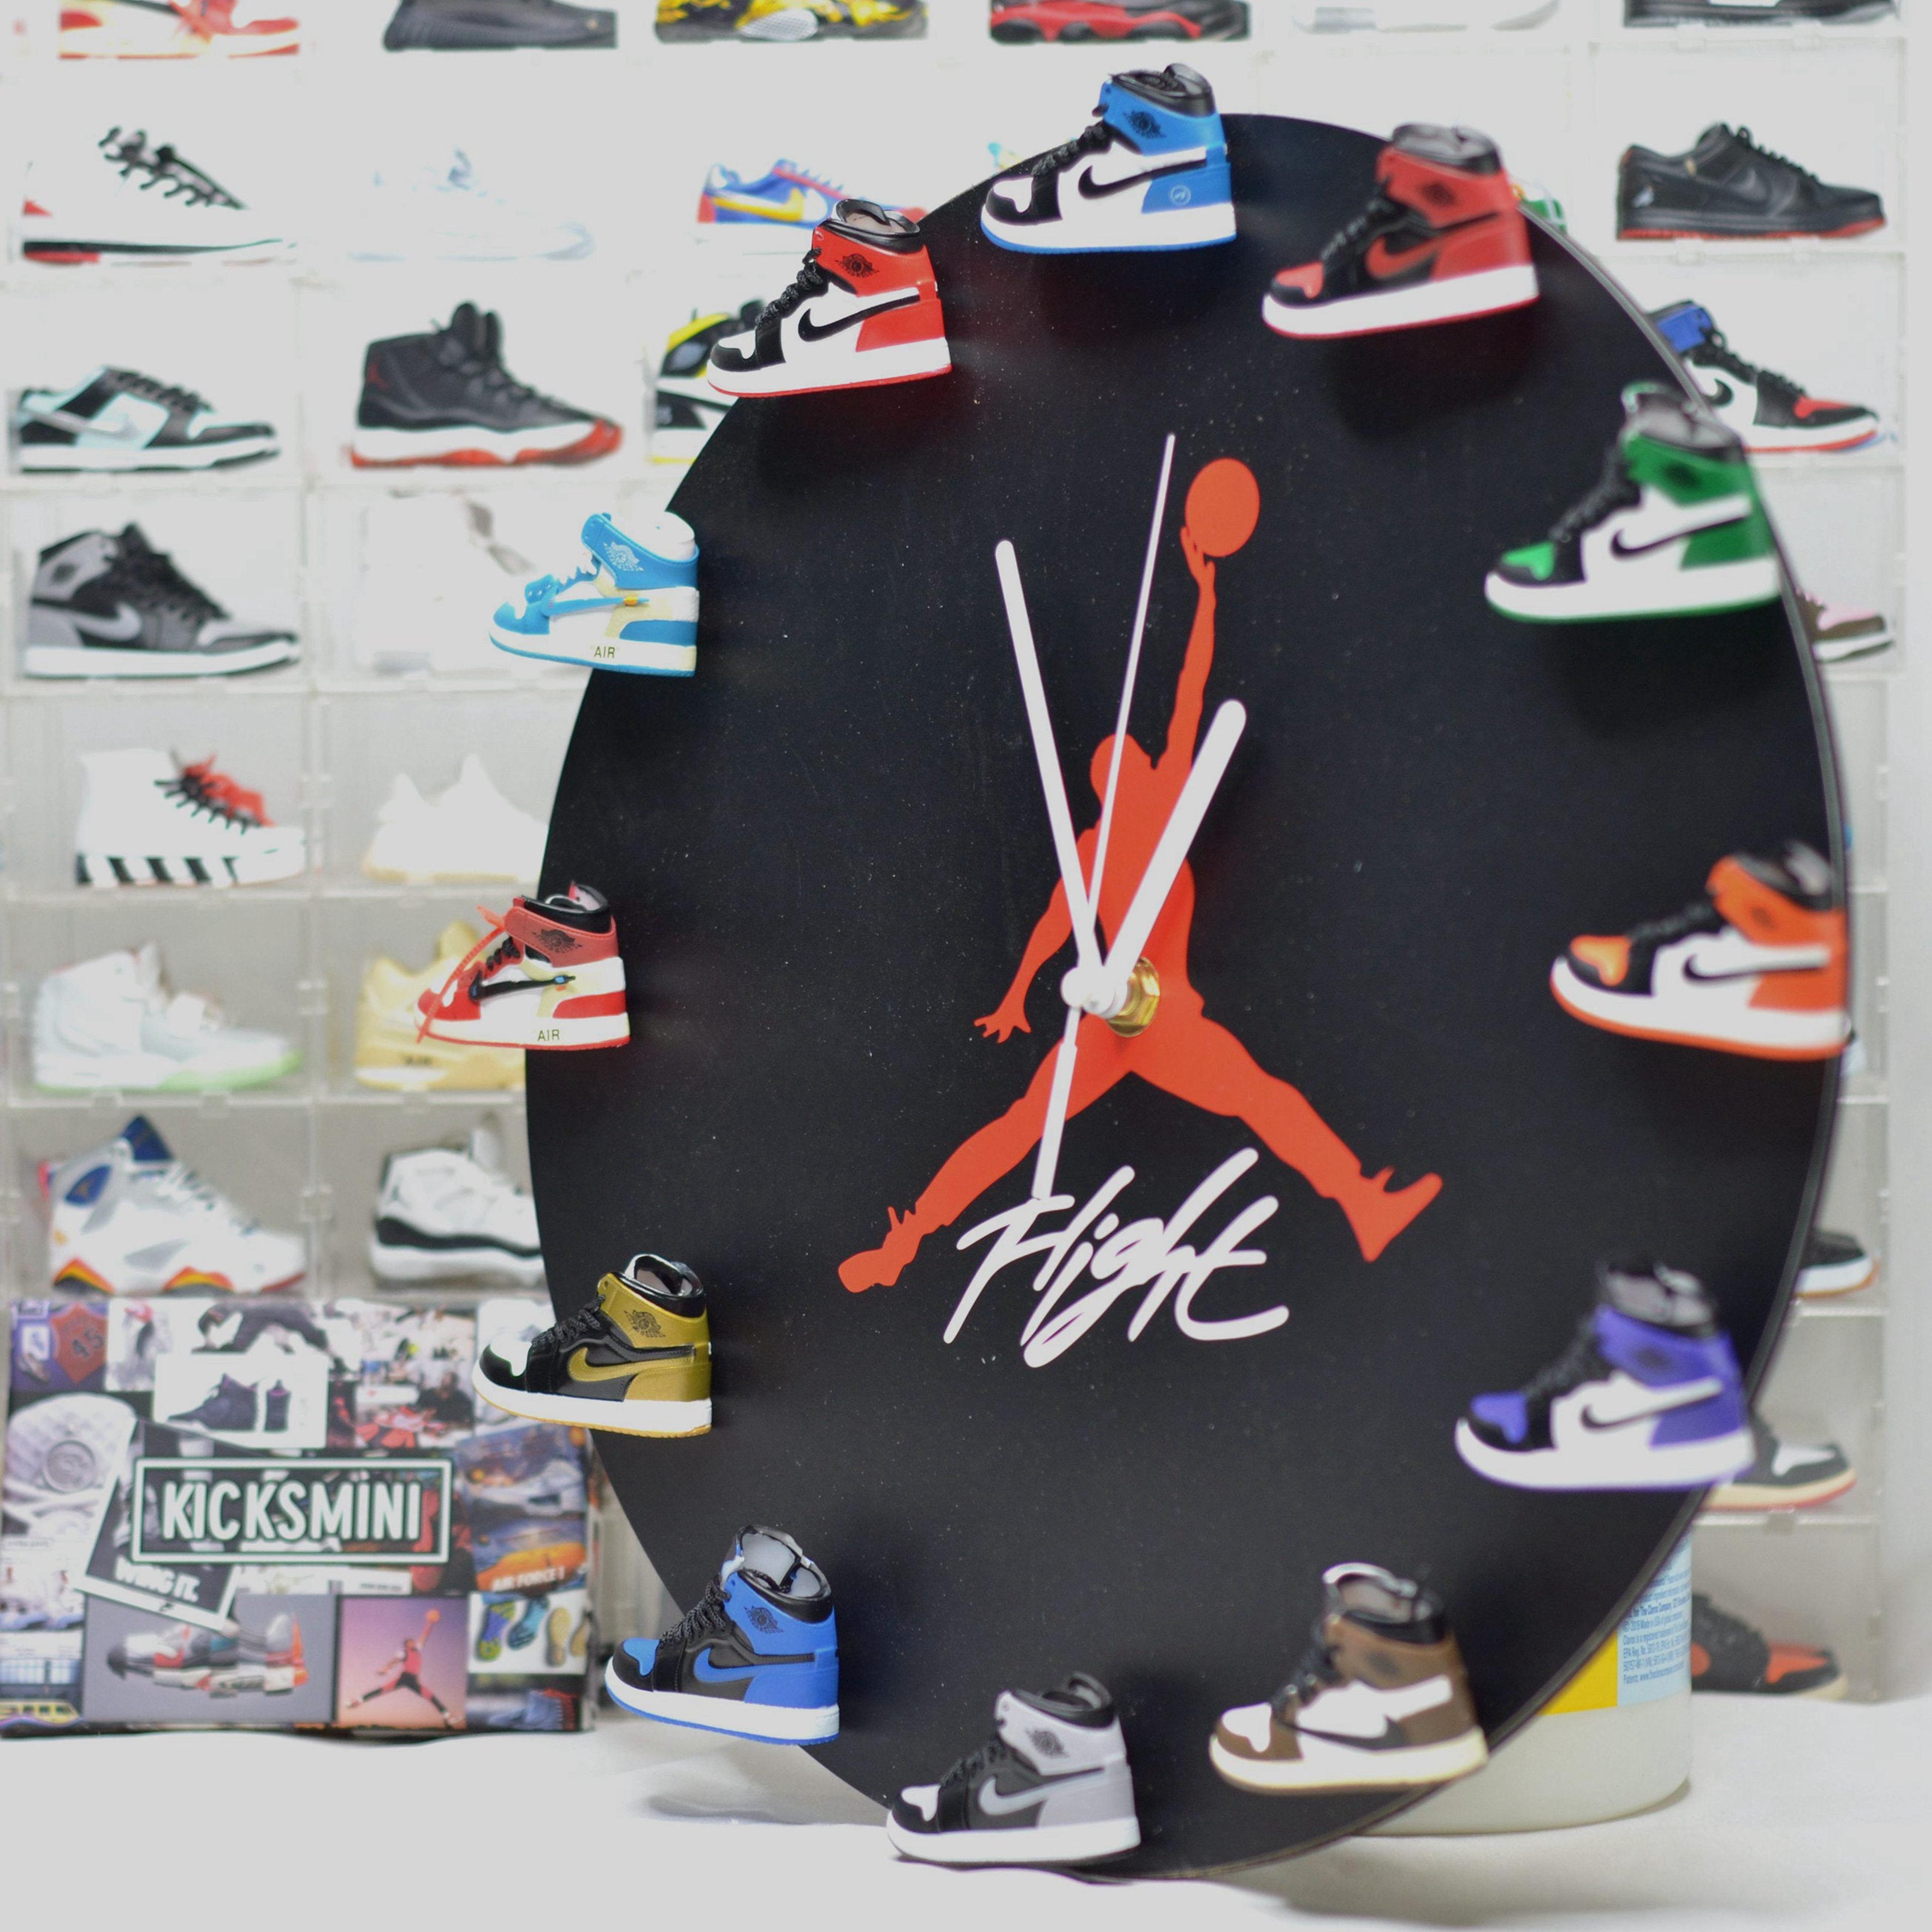 Alternate View 1 of Handcrafted 3D Sneakers Clock with 12 mini sneakers